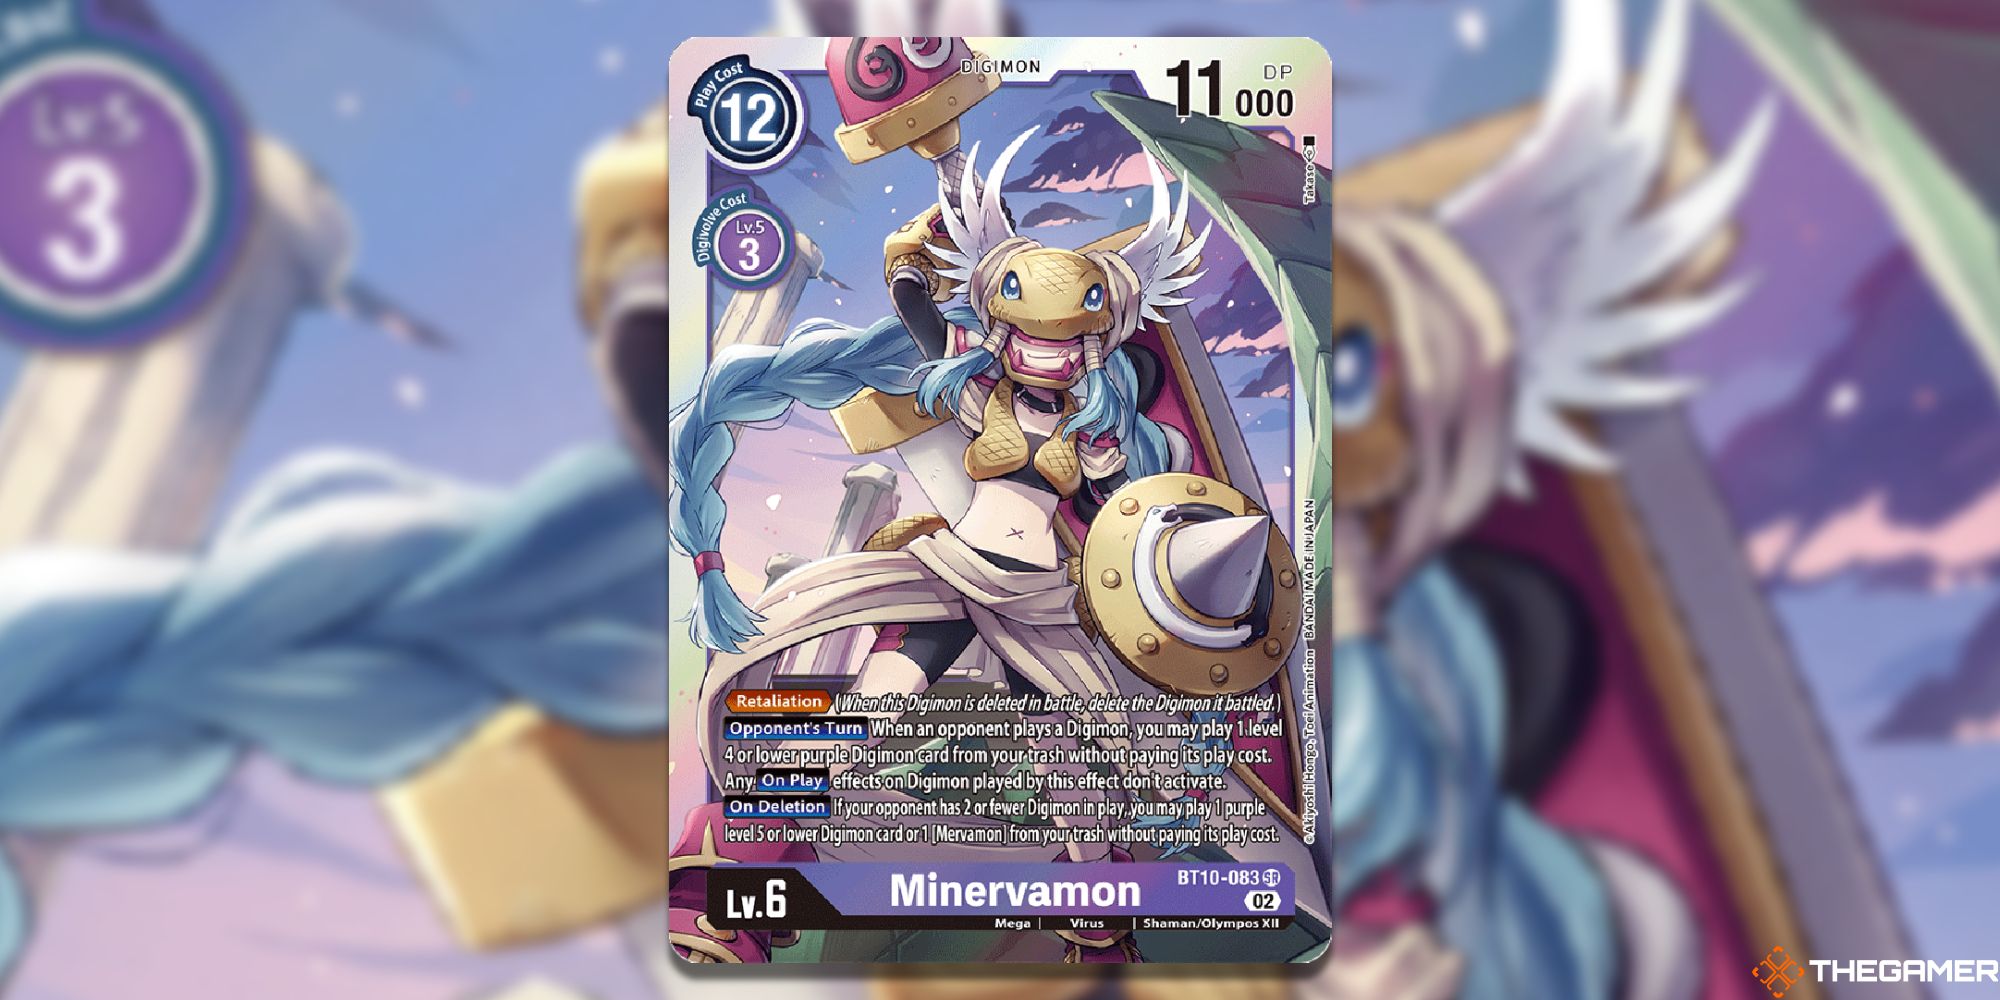 minervamon card from digimon card game with blur background